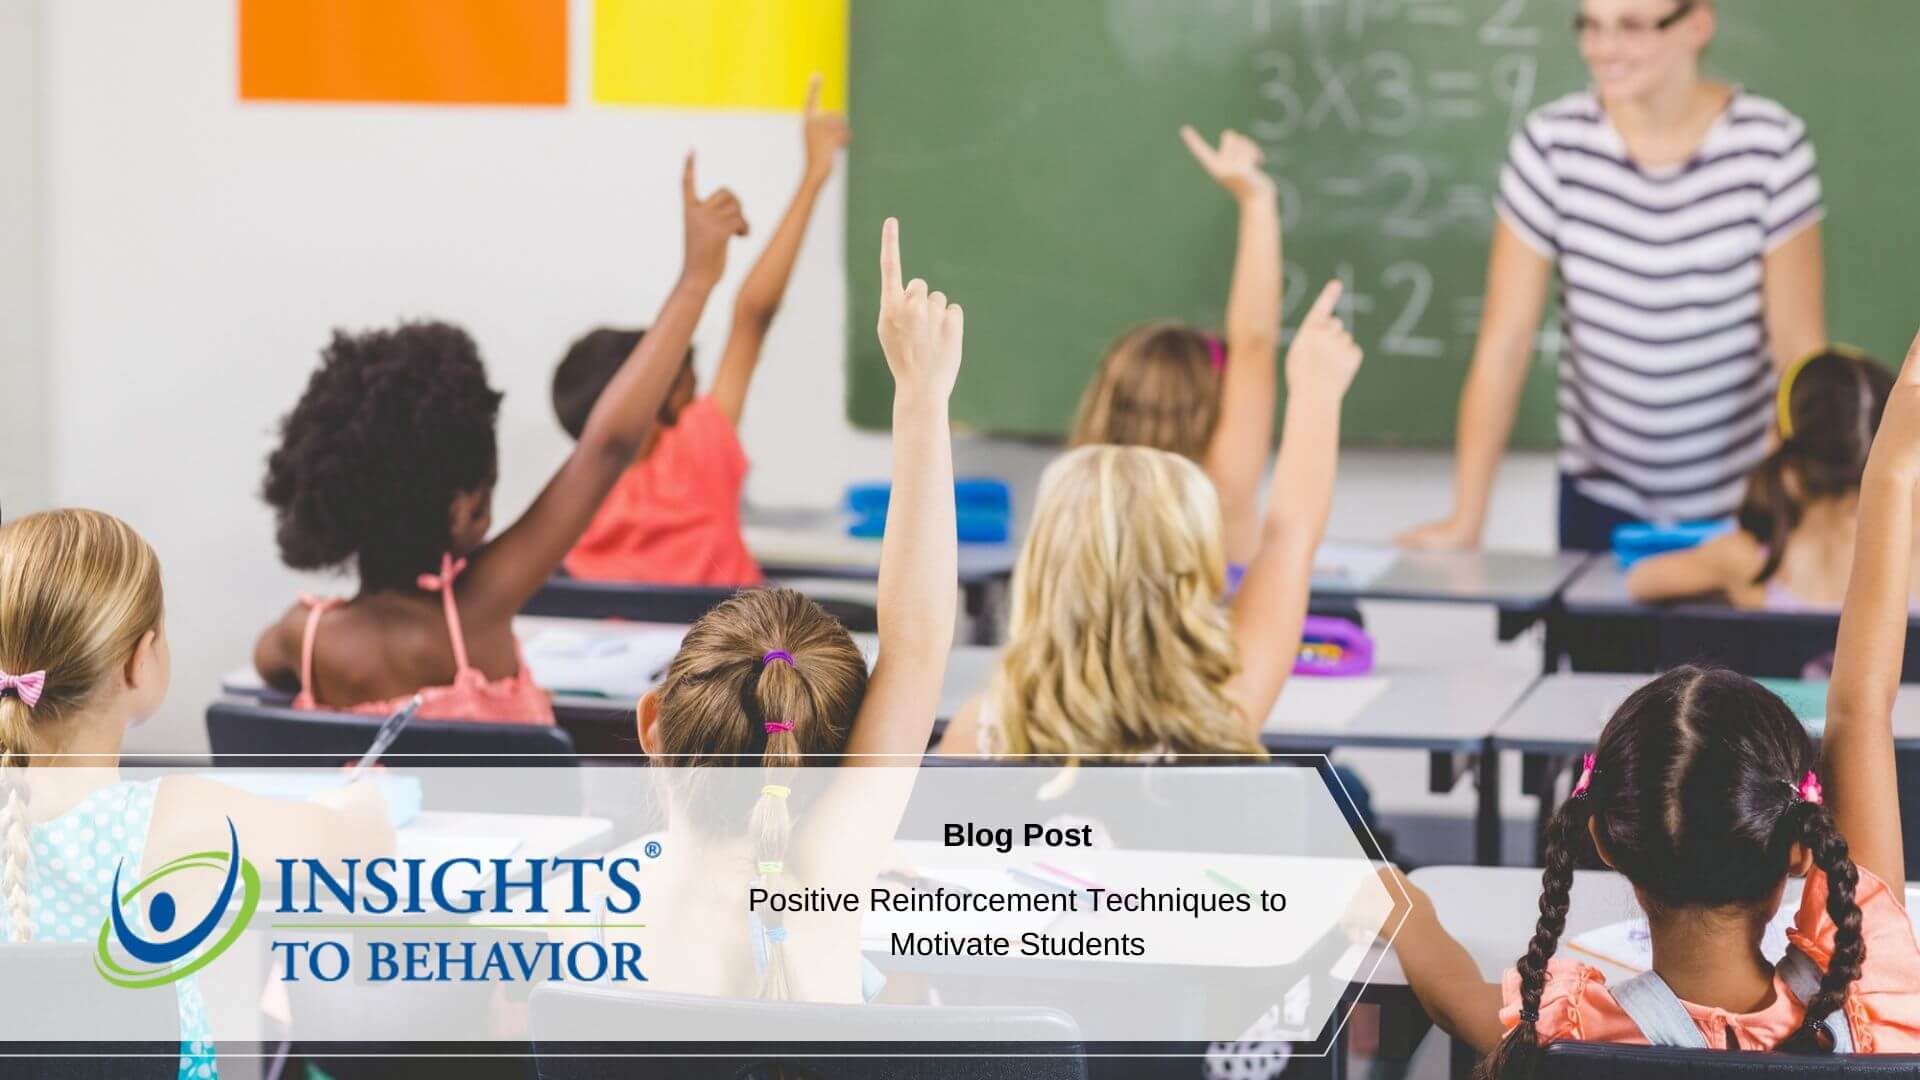 Insights to behavior blog post image template (7)